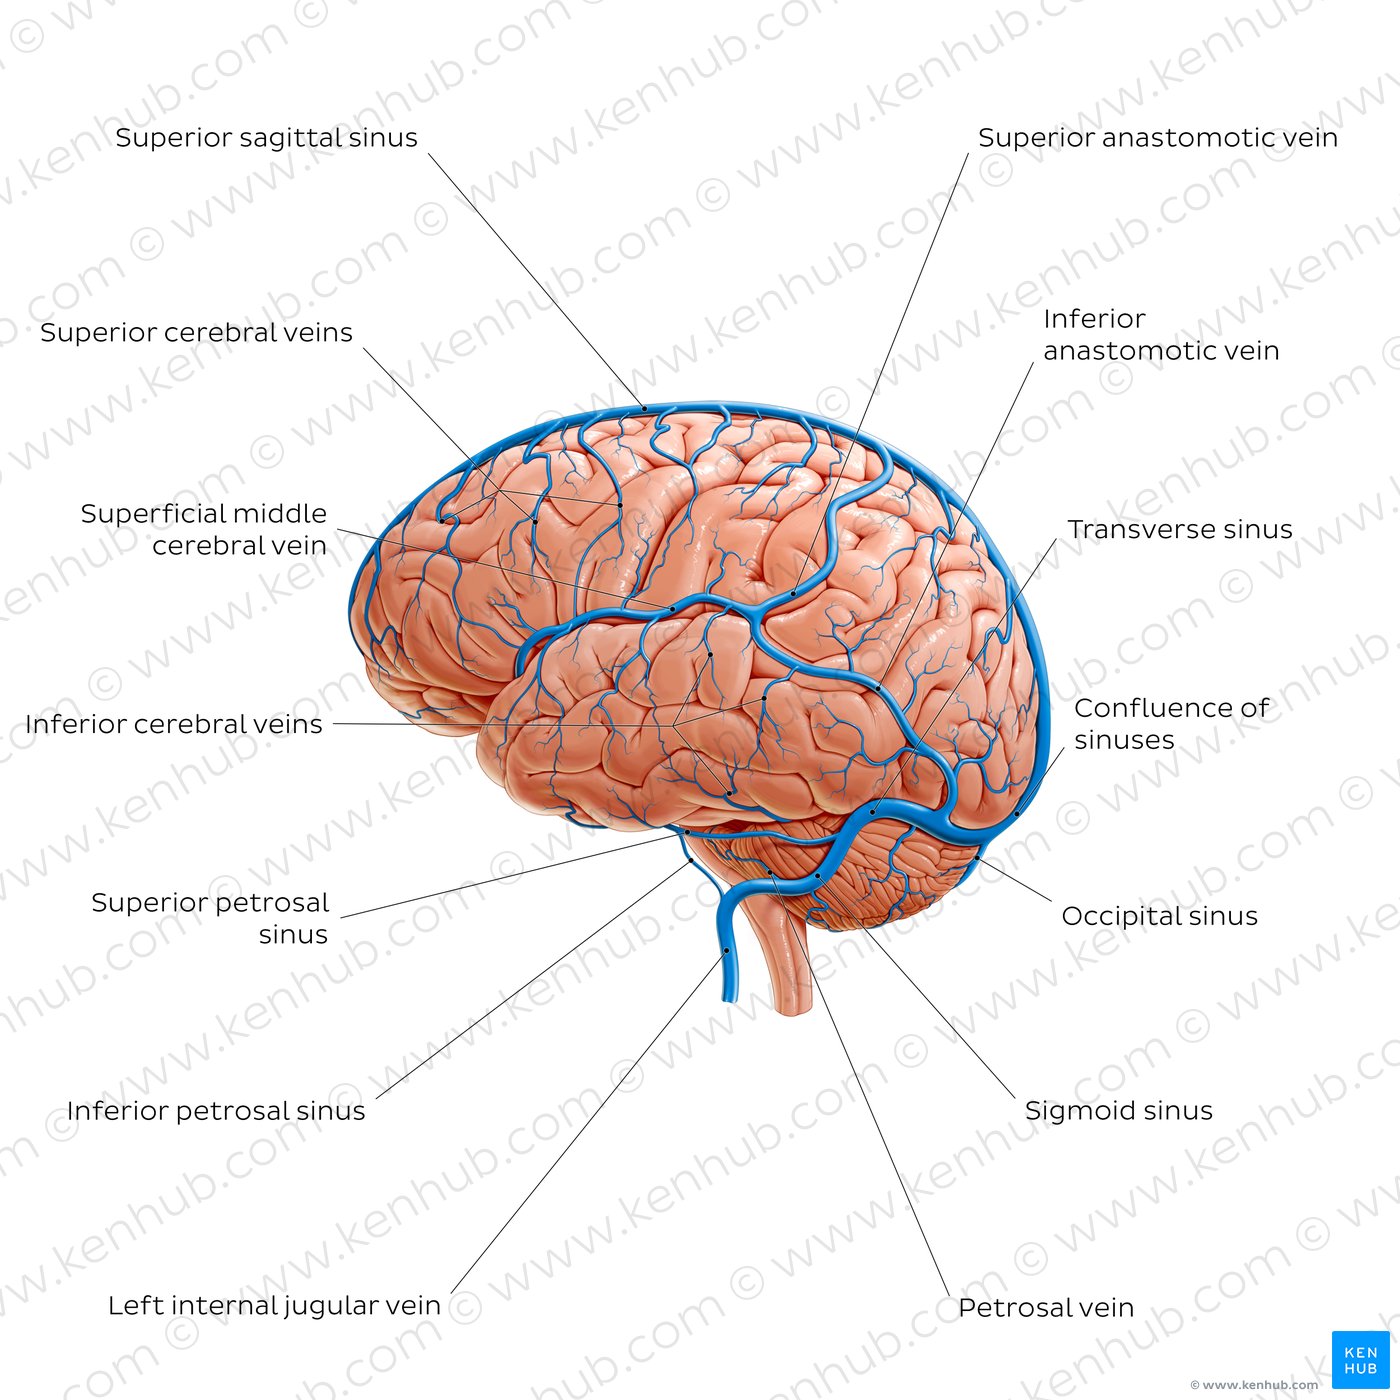 Cerebral veins - Lateral view